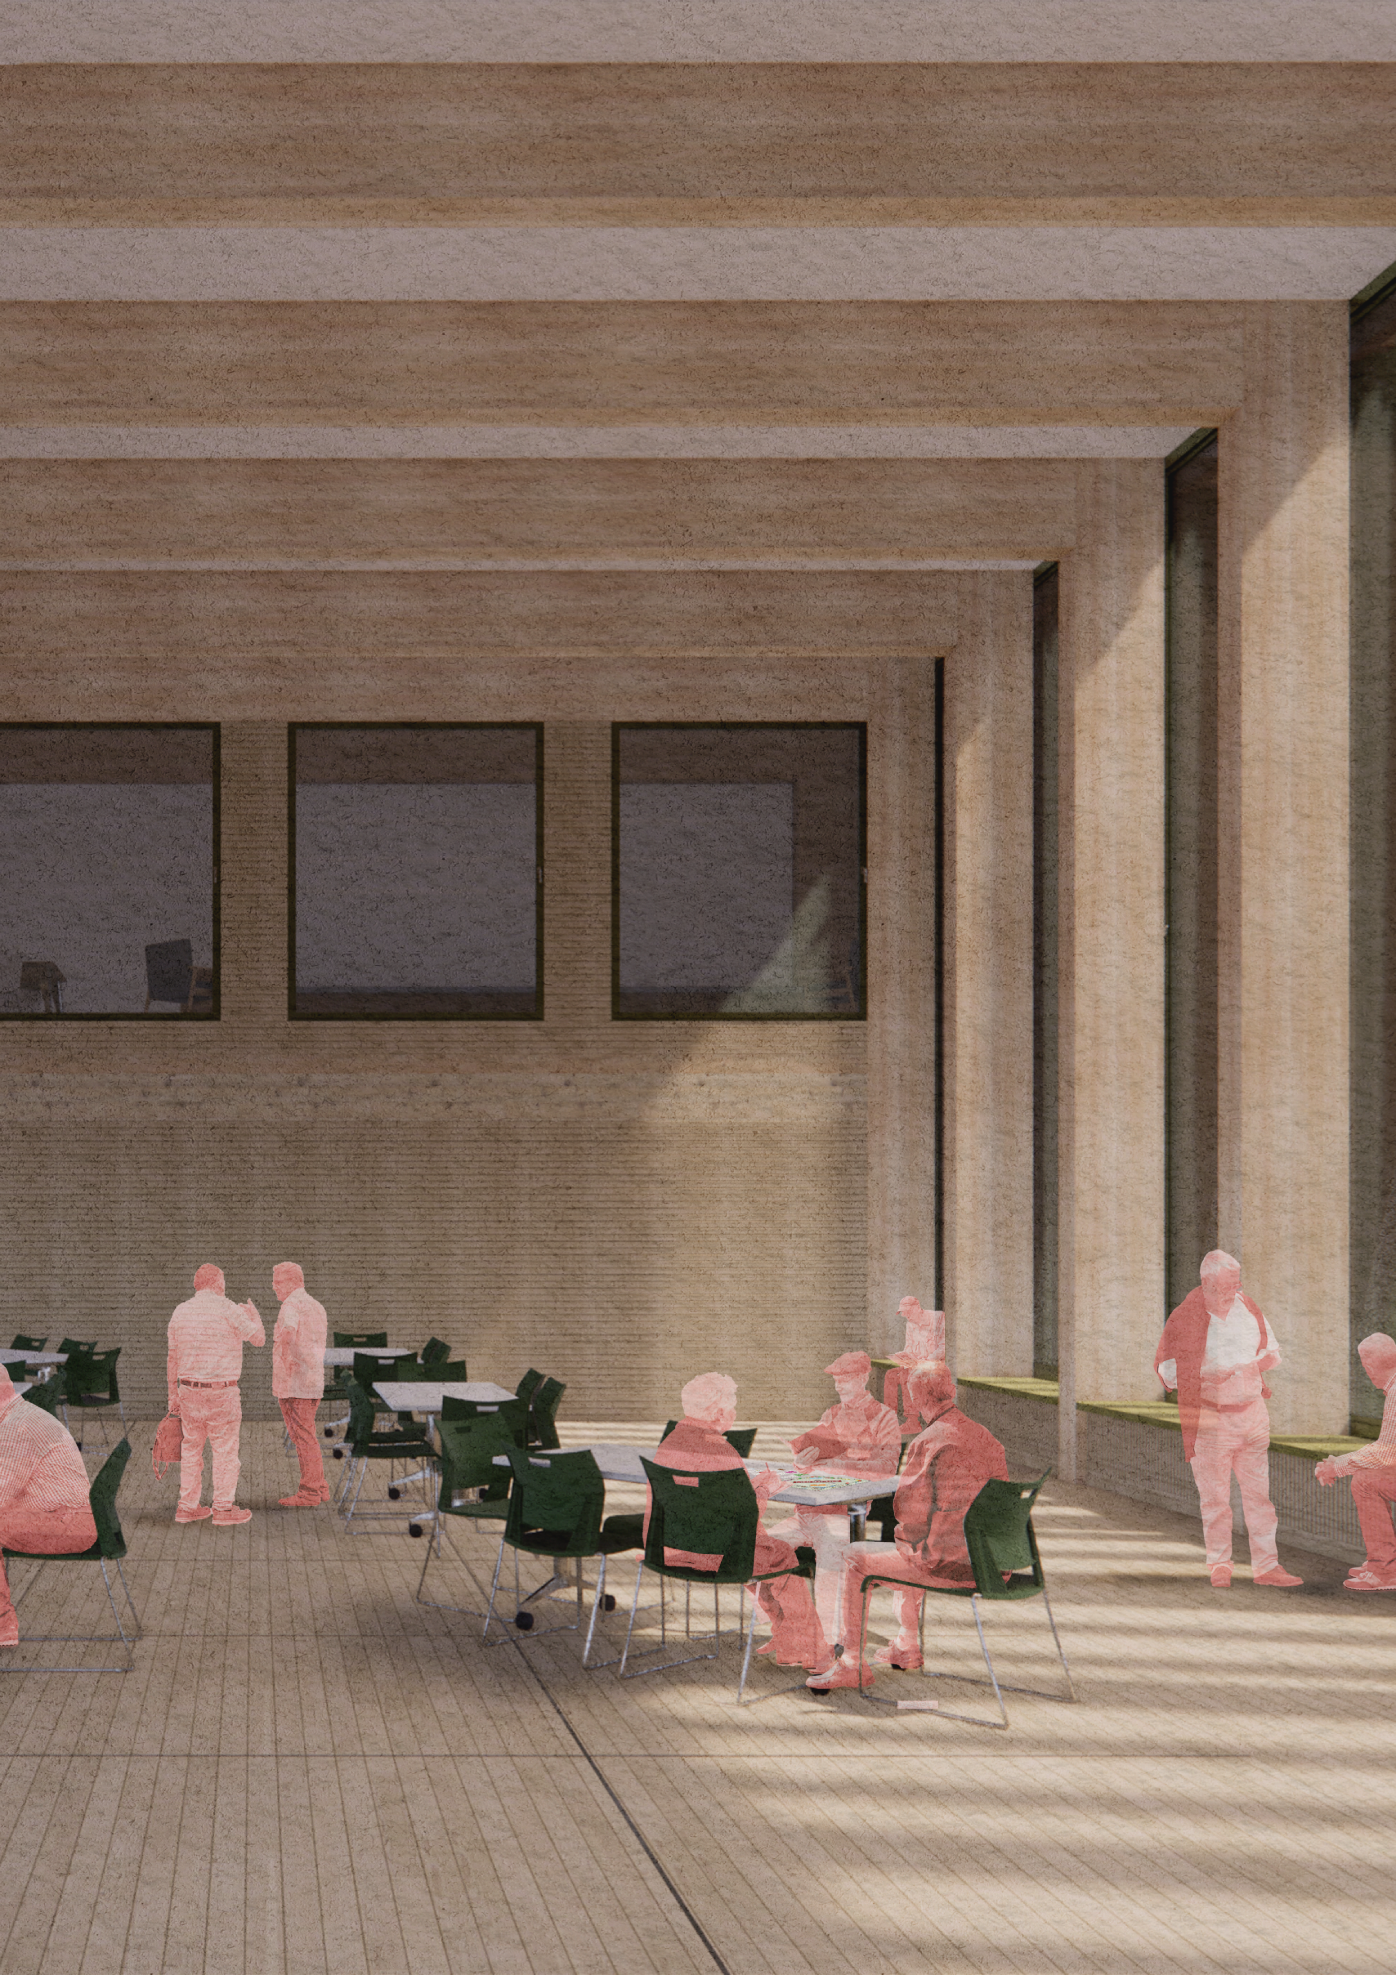 Rendering of the community hall